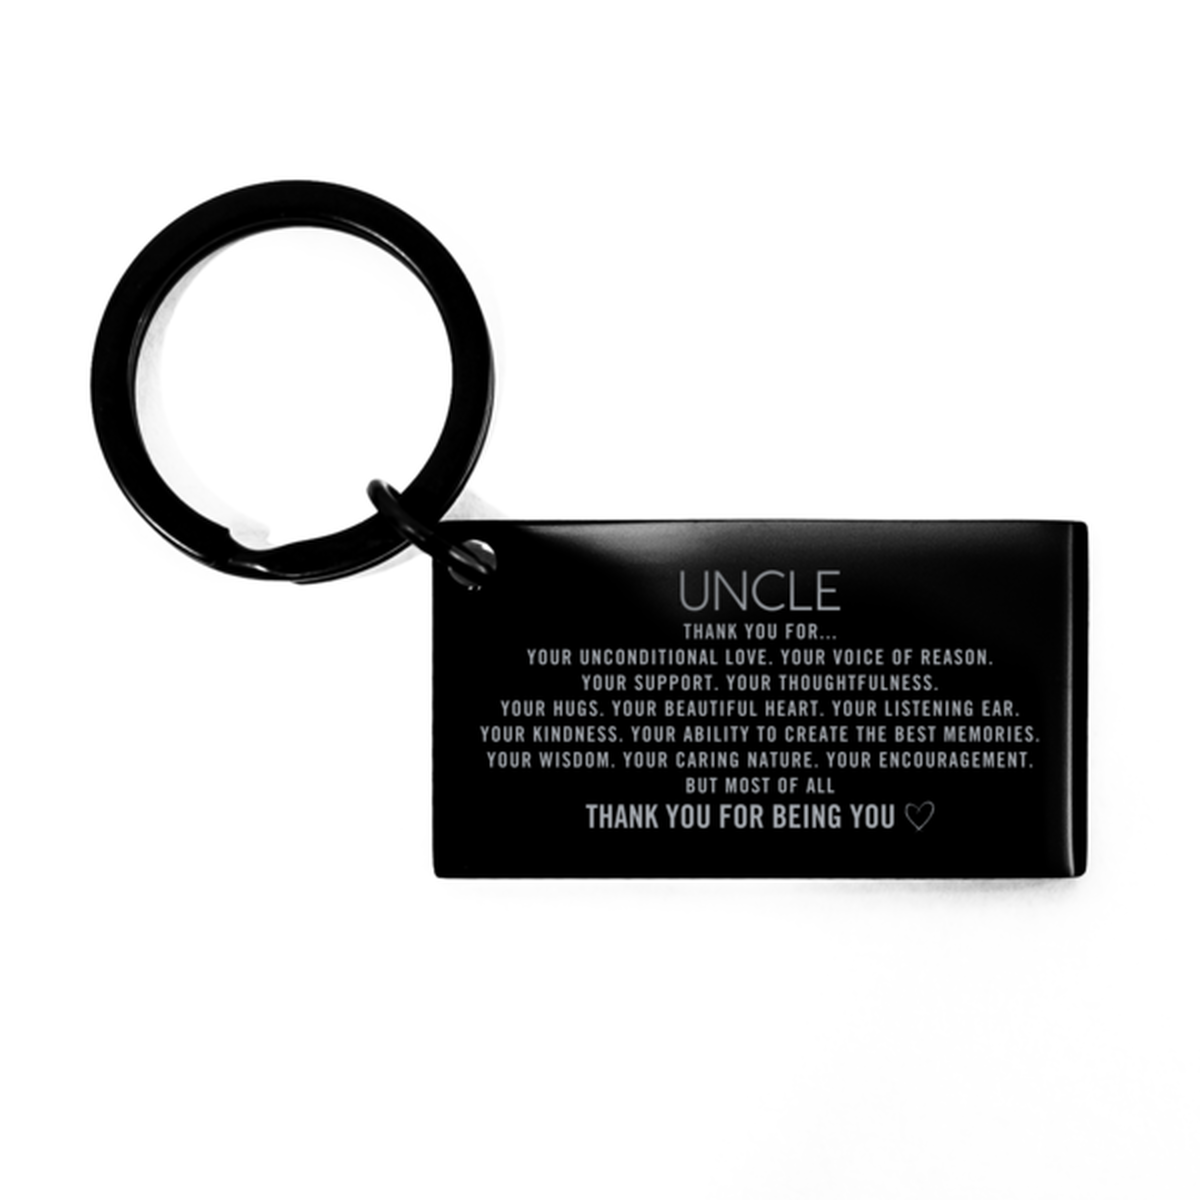 Uncle Keychain Custom, Engraved Gifts For Uncle Christmas Graduation Birthday Gifts for Men Women Uncle Thank you for Your unconditional love